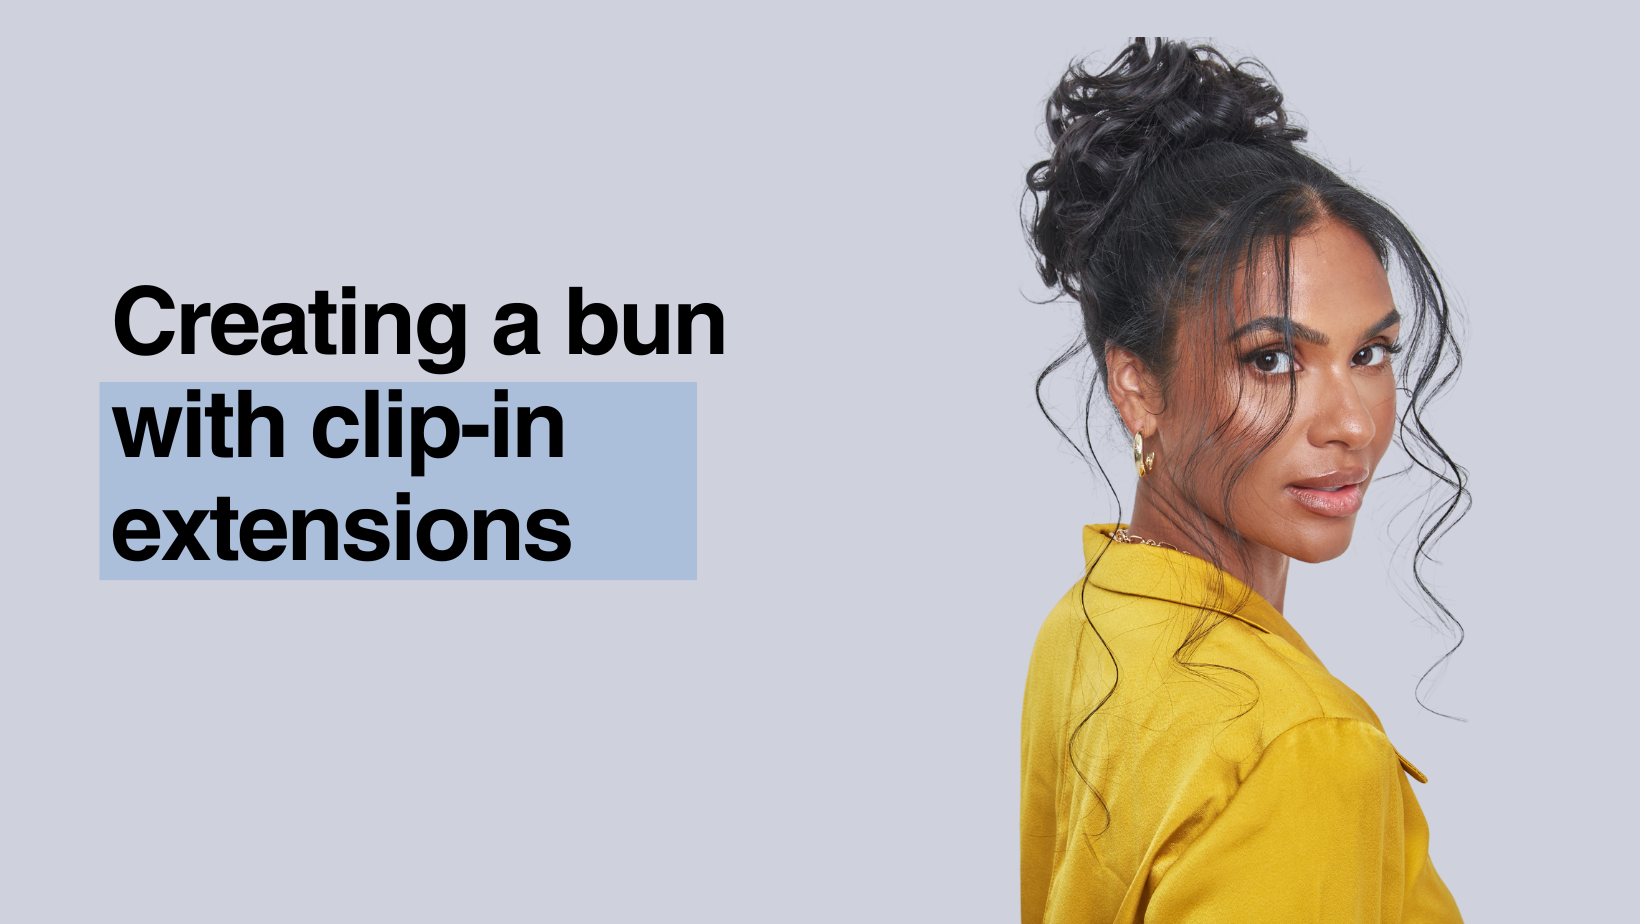 Creating a bun with clip-in extensions